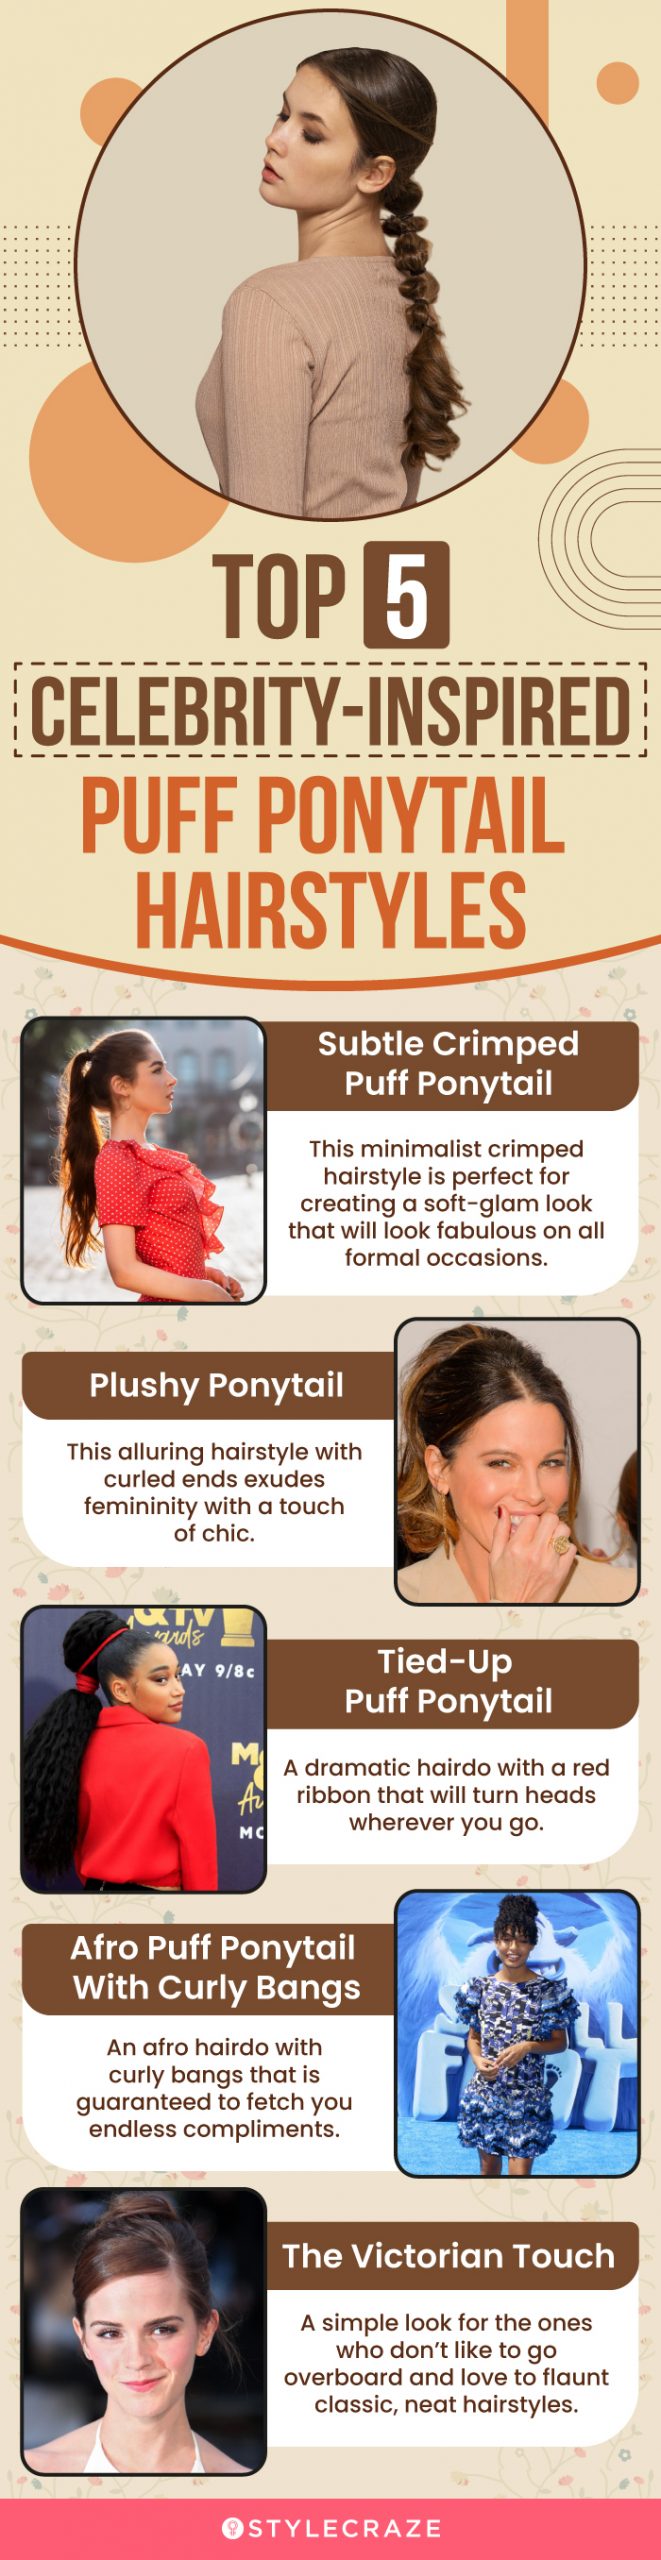 top 5 celebrity inspired puff ponytail hairstyles (infographic)